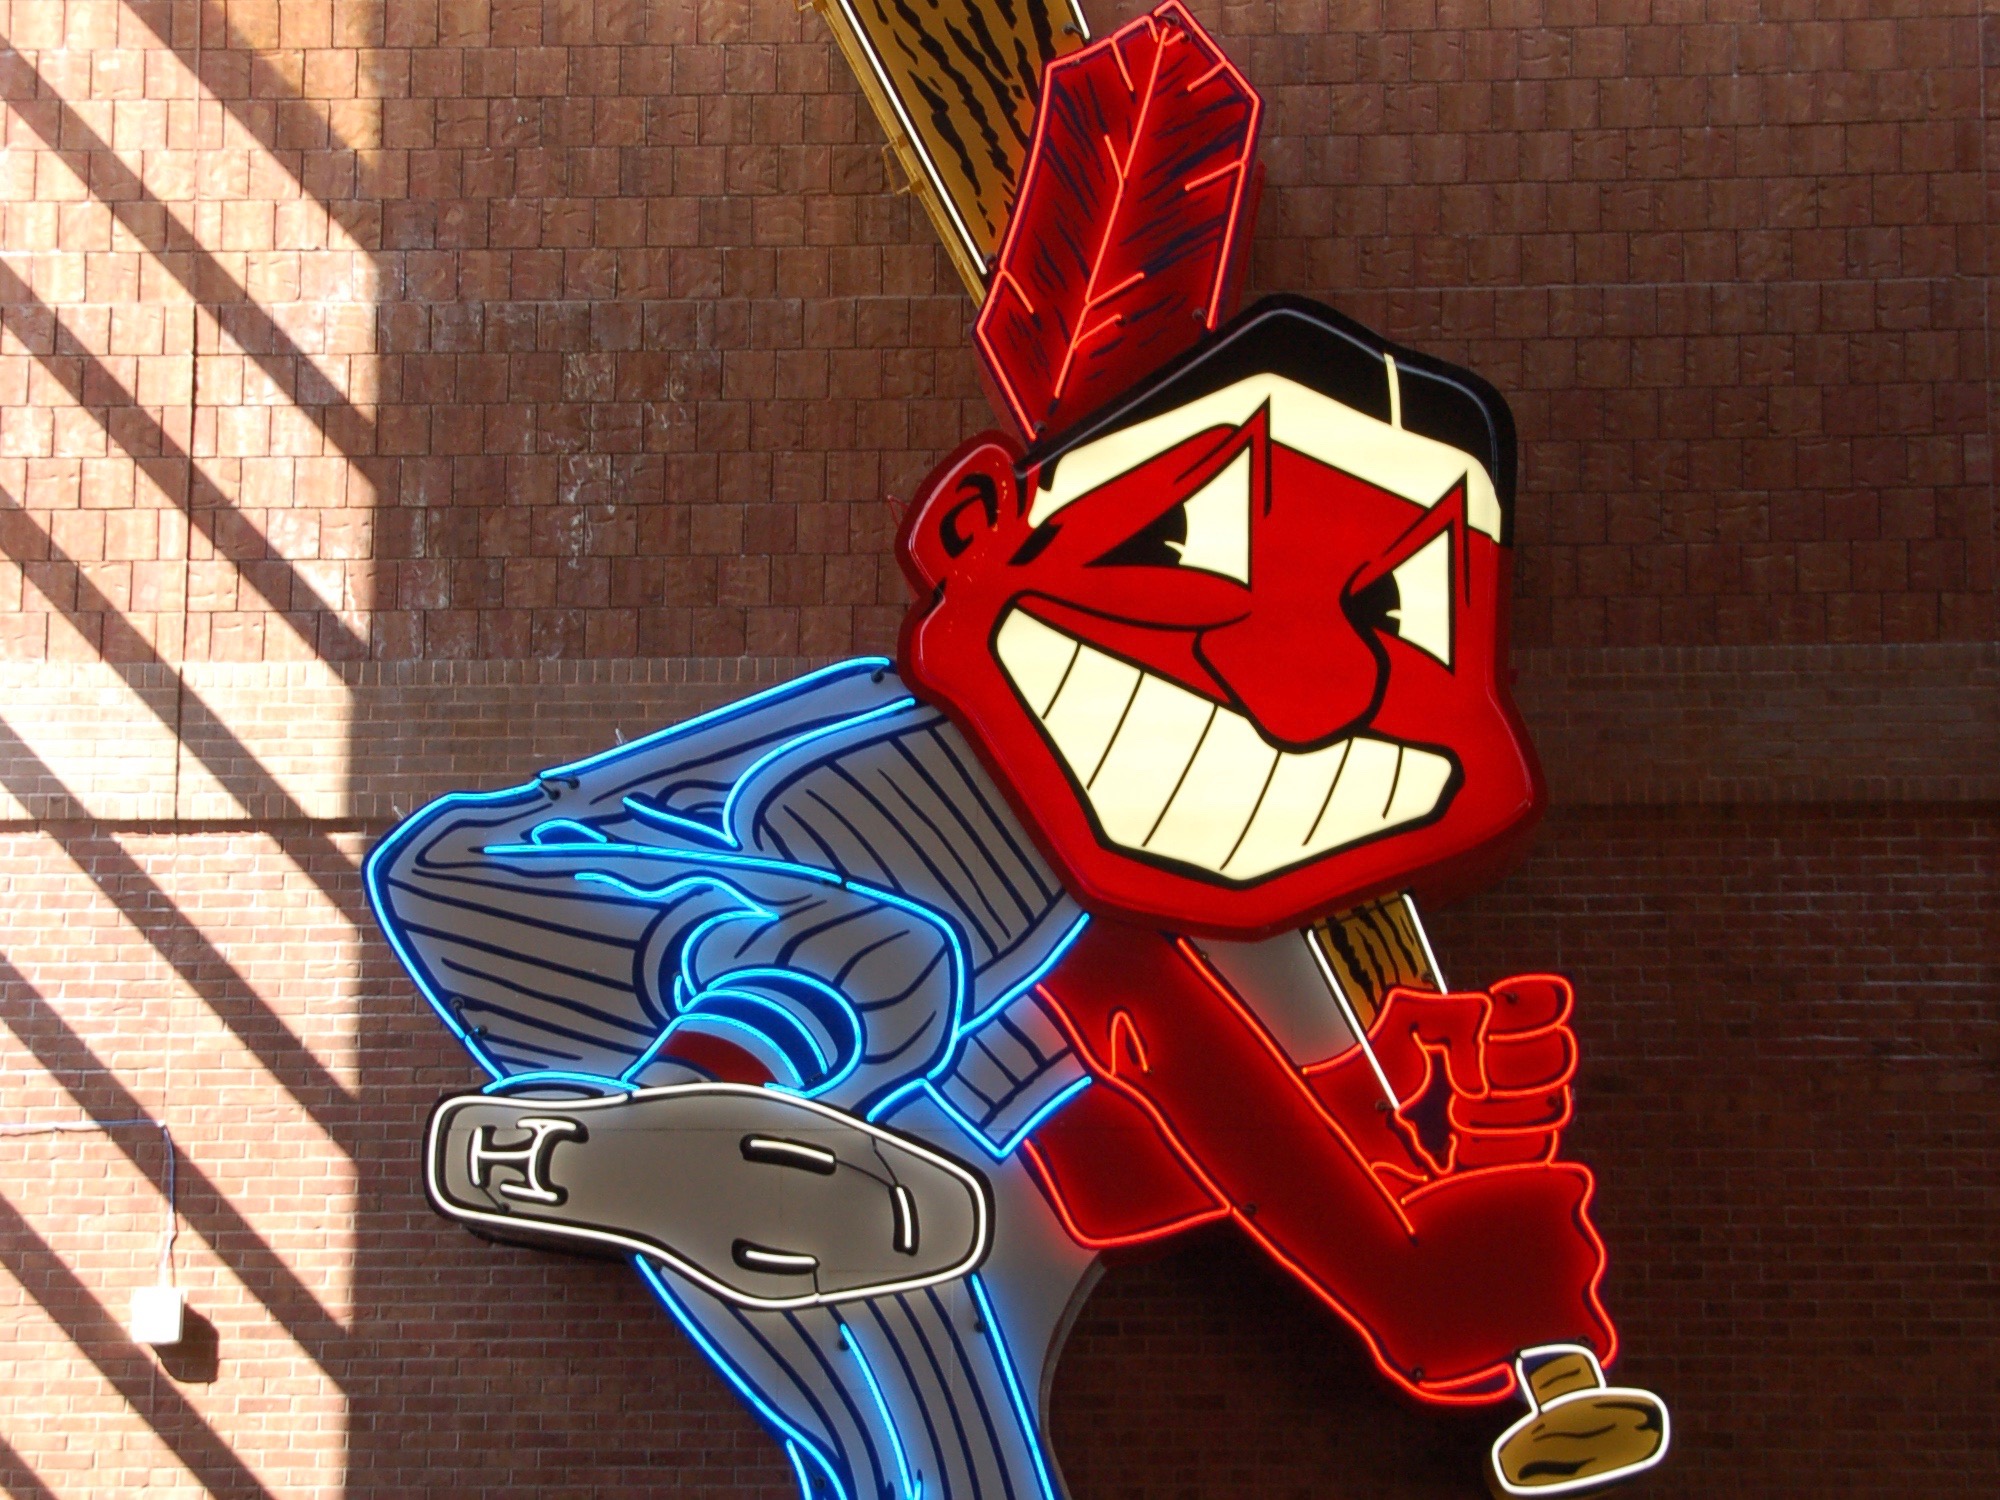 Cleveland's Chief Wahoo: Why the most offensive image in sports